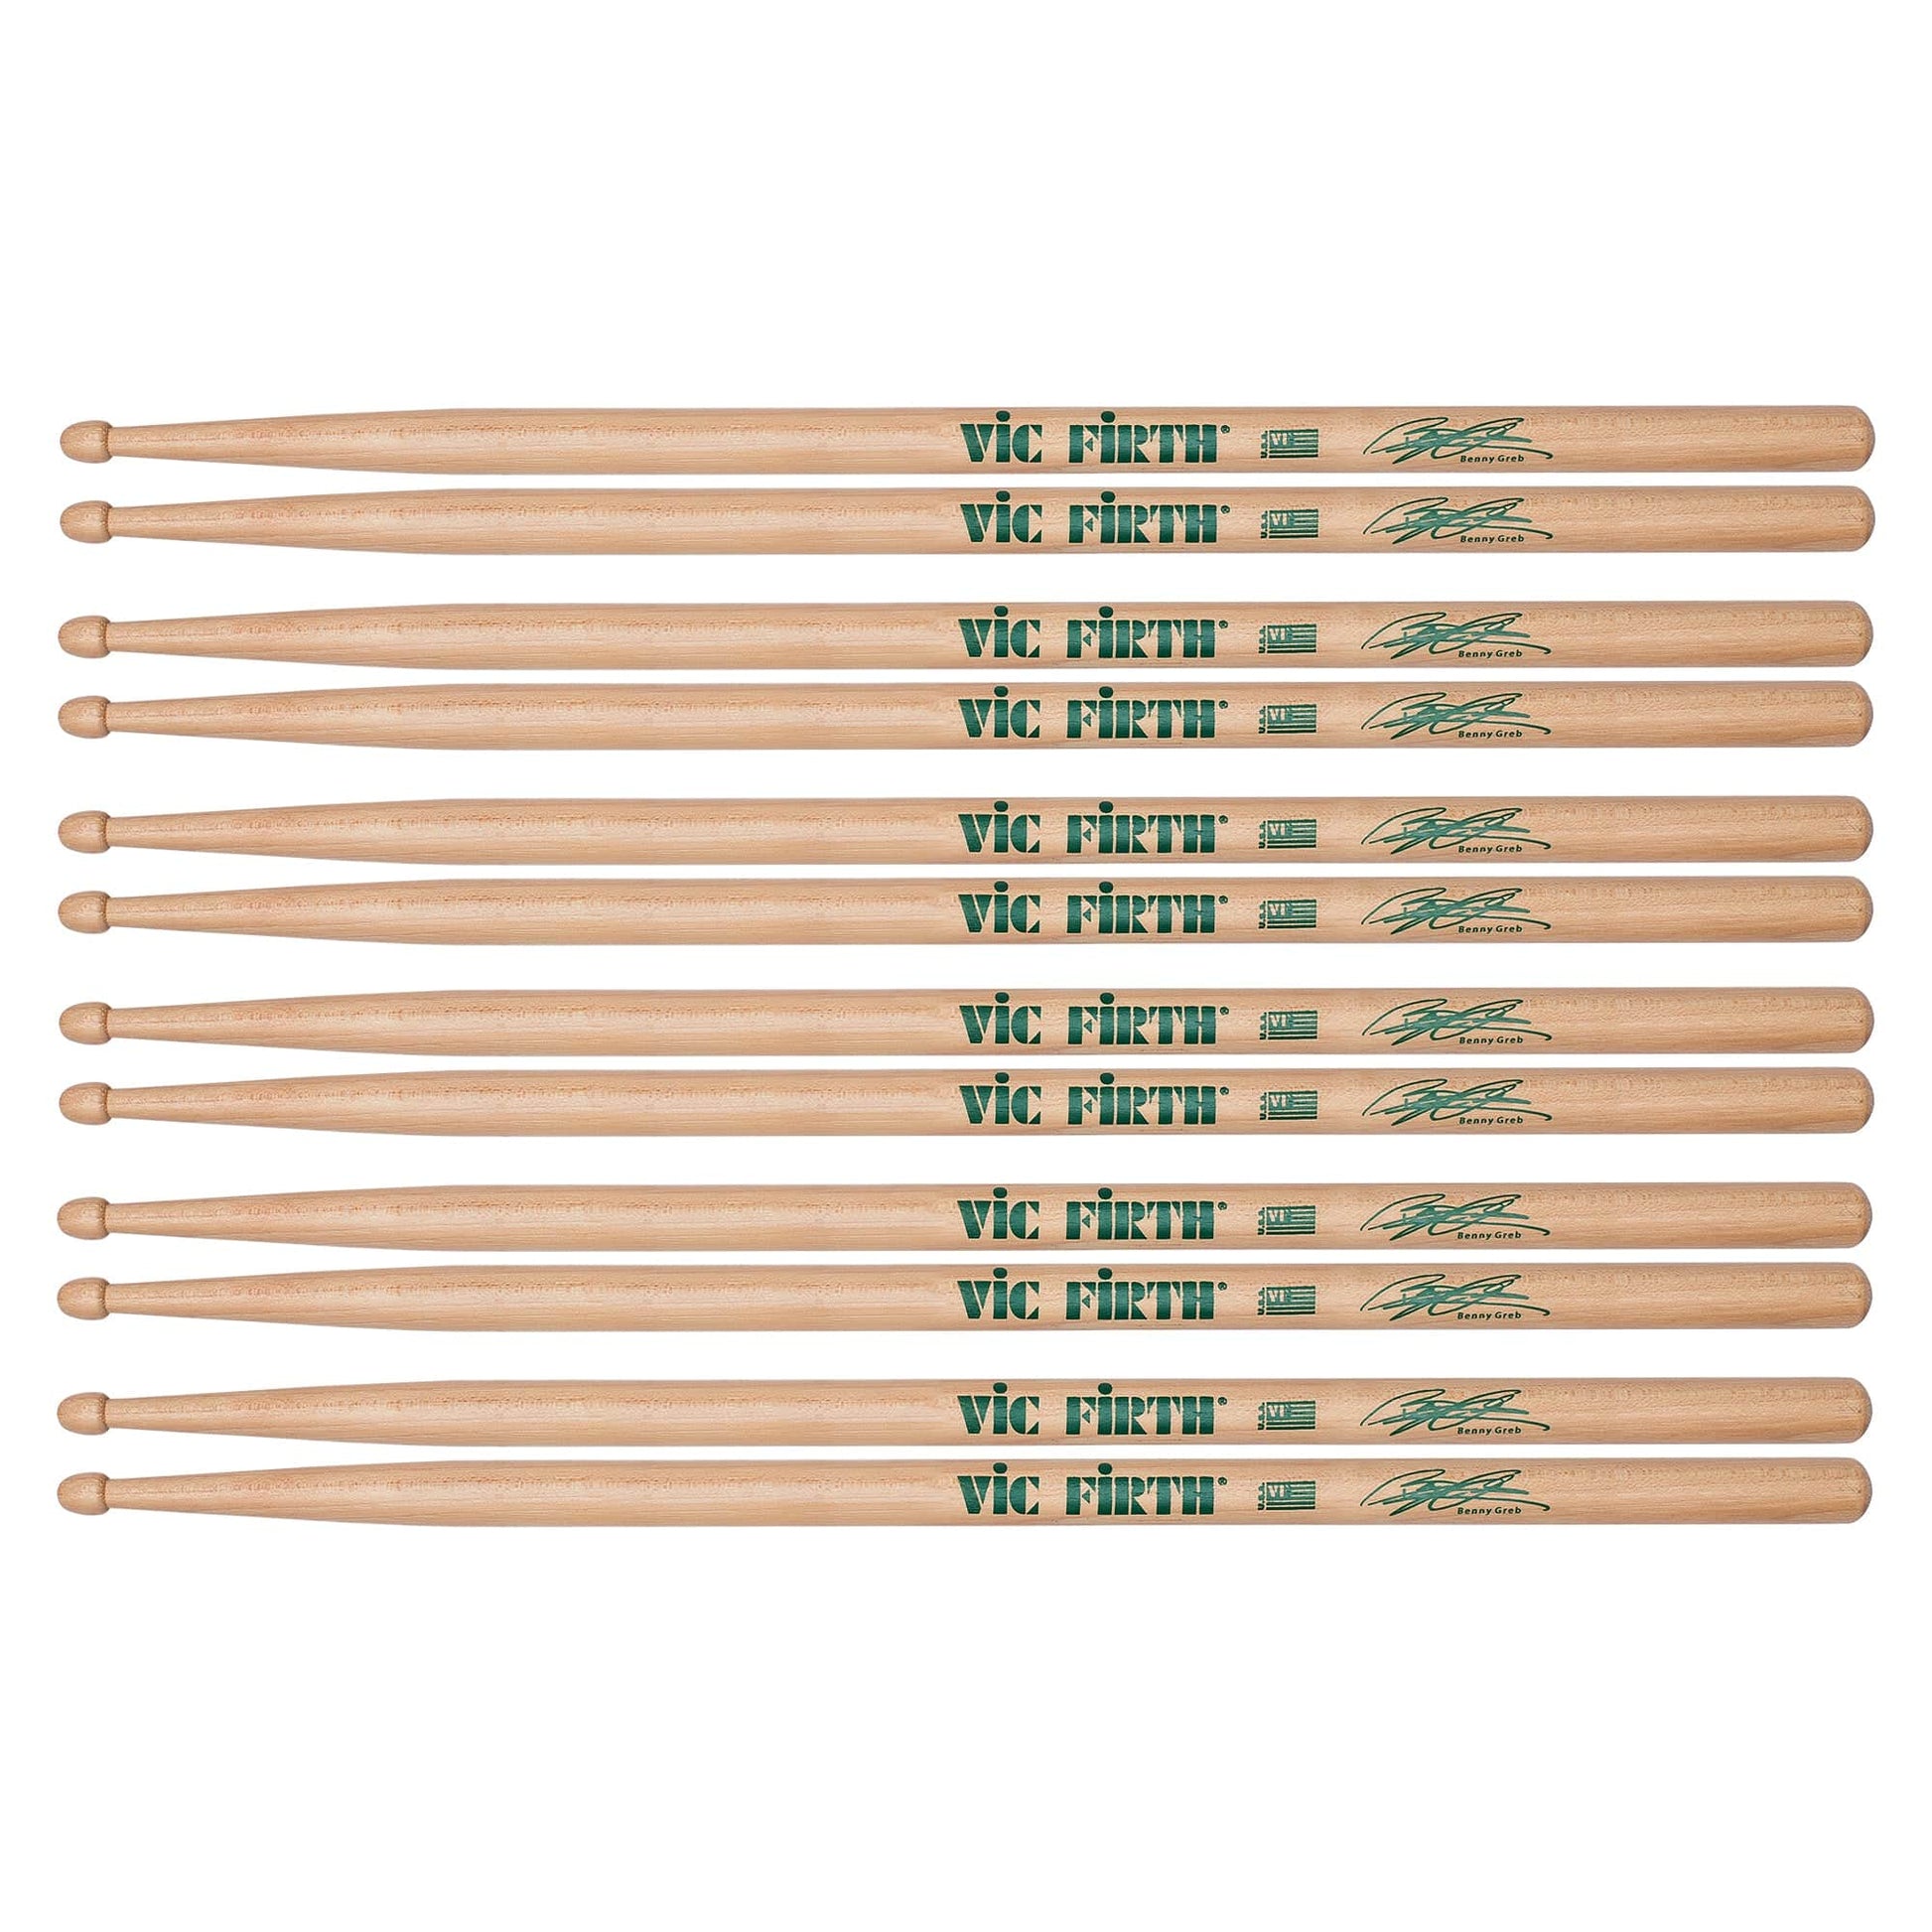 Vic Firth Benny Greb Signature Drum Sticks (6 Pair Bundle) Drums and Percussion / Parts and Accessories / Drum Sticks and Mallets